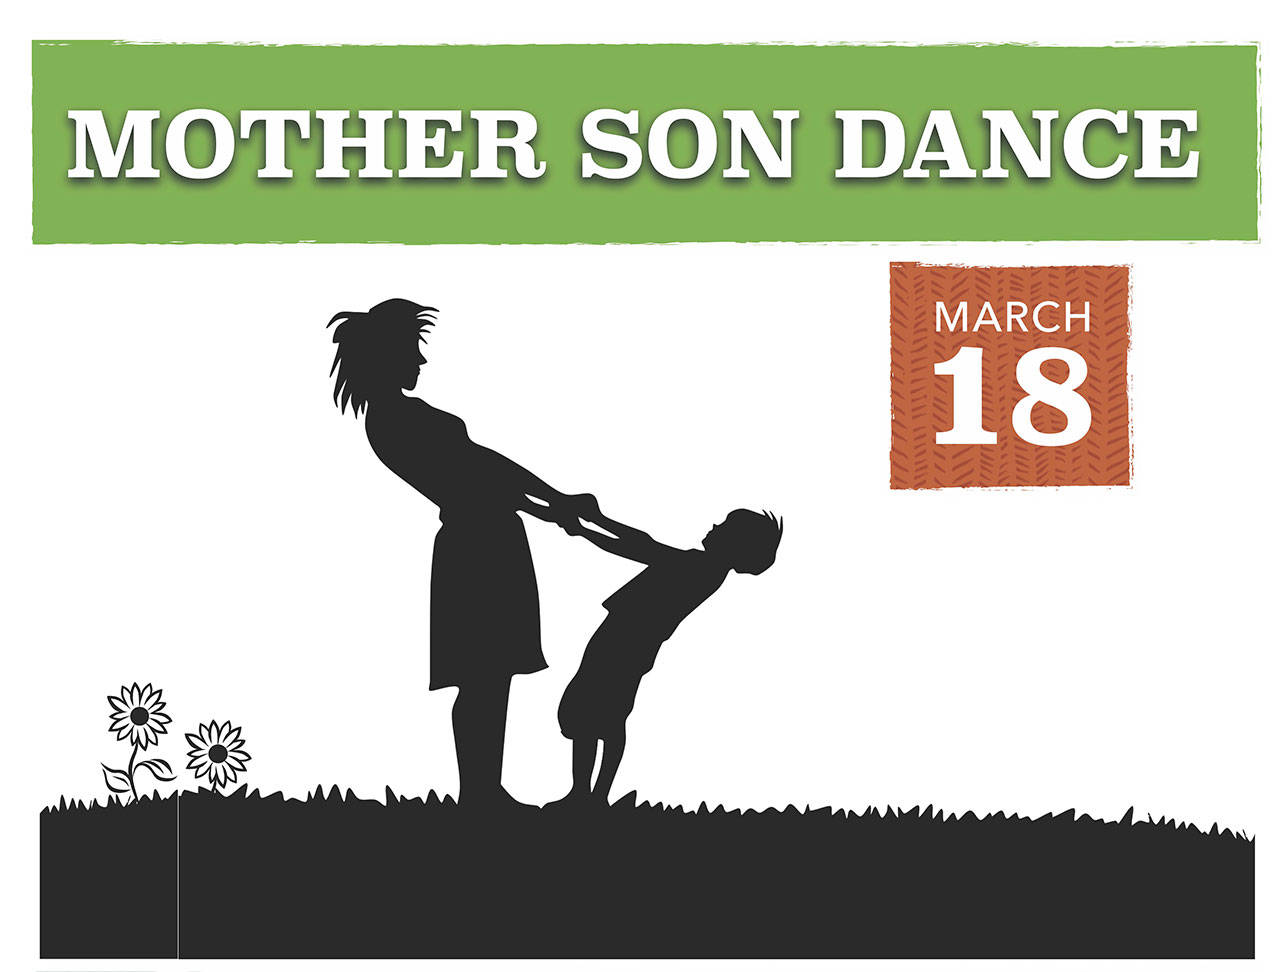 Mother and son dance night